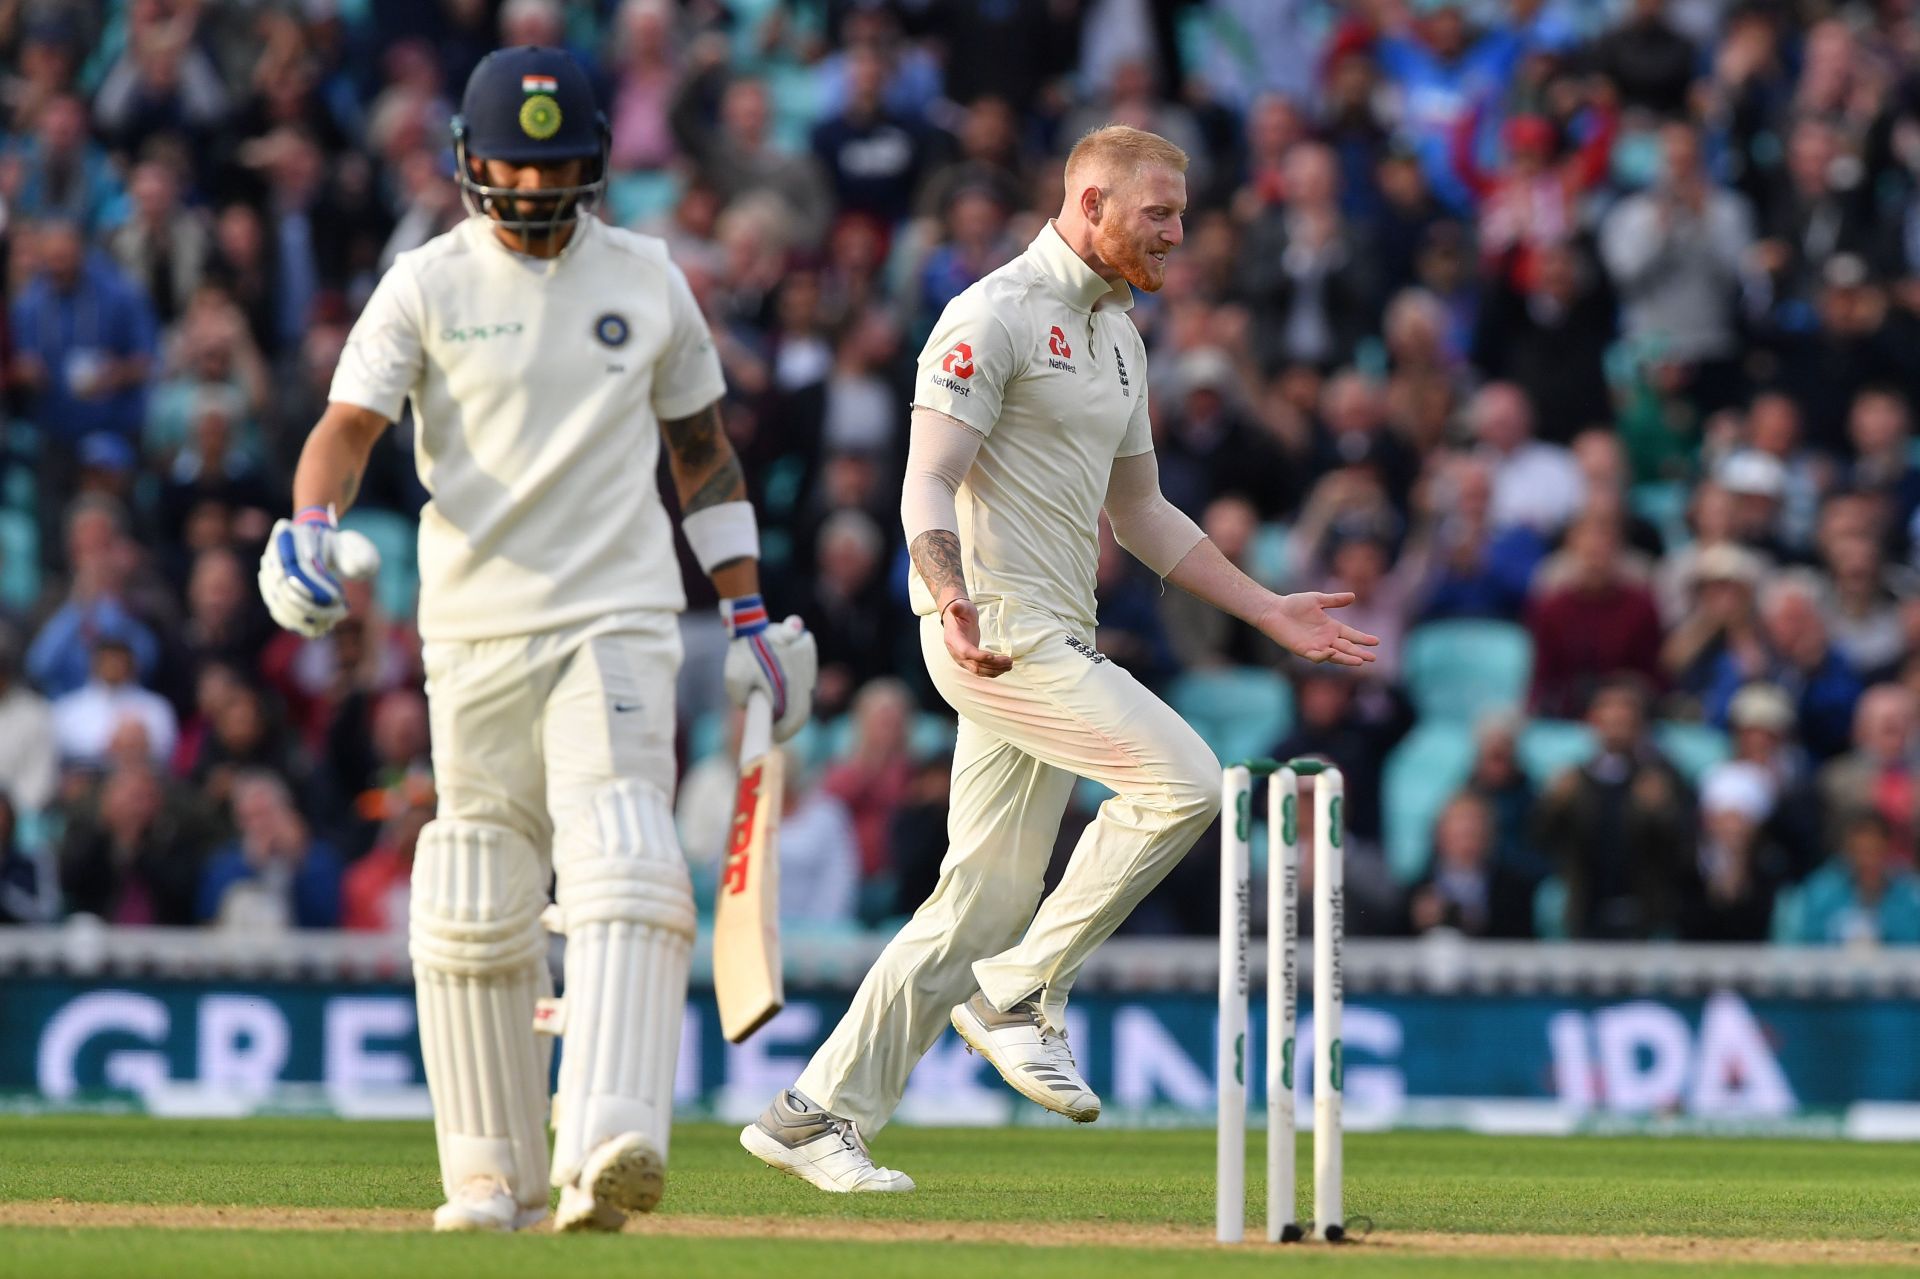 Cricketers like Virat Kohli and Ben Stokes have expressed dealing with mental issues in the past.